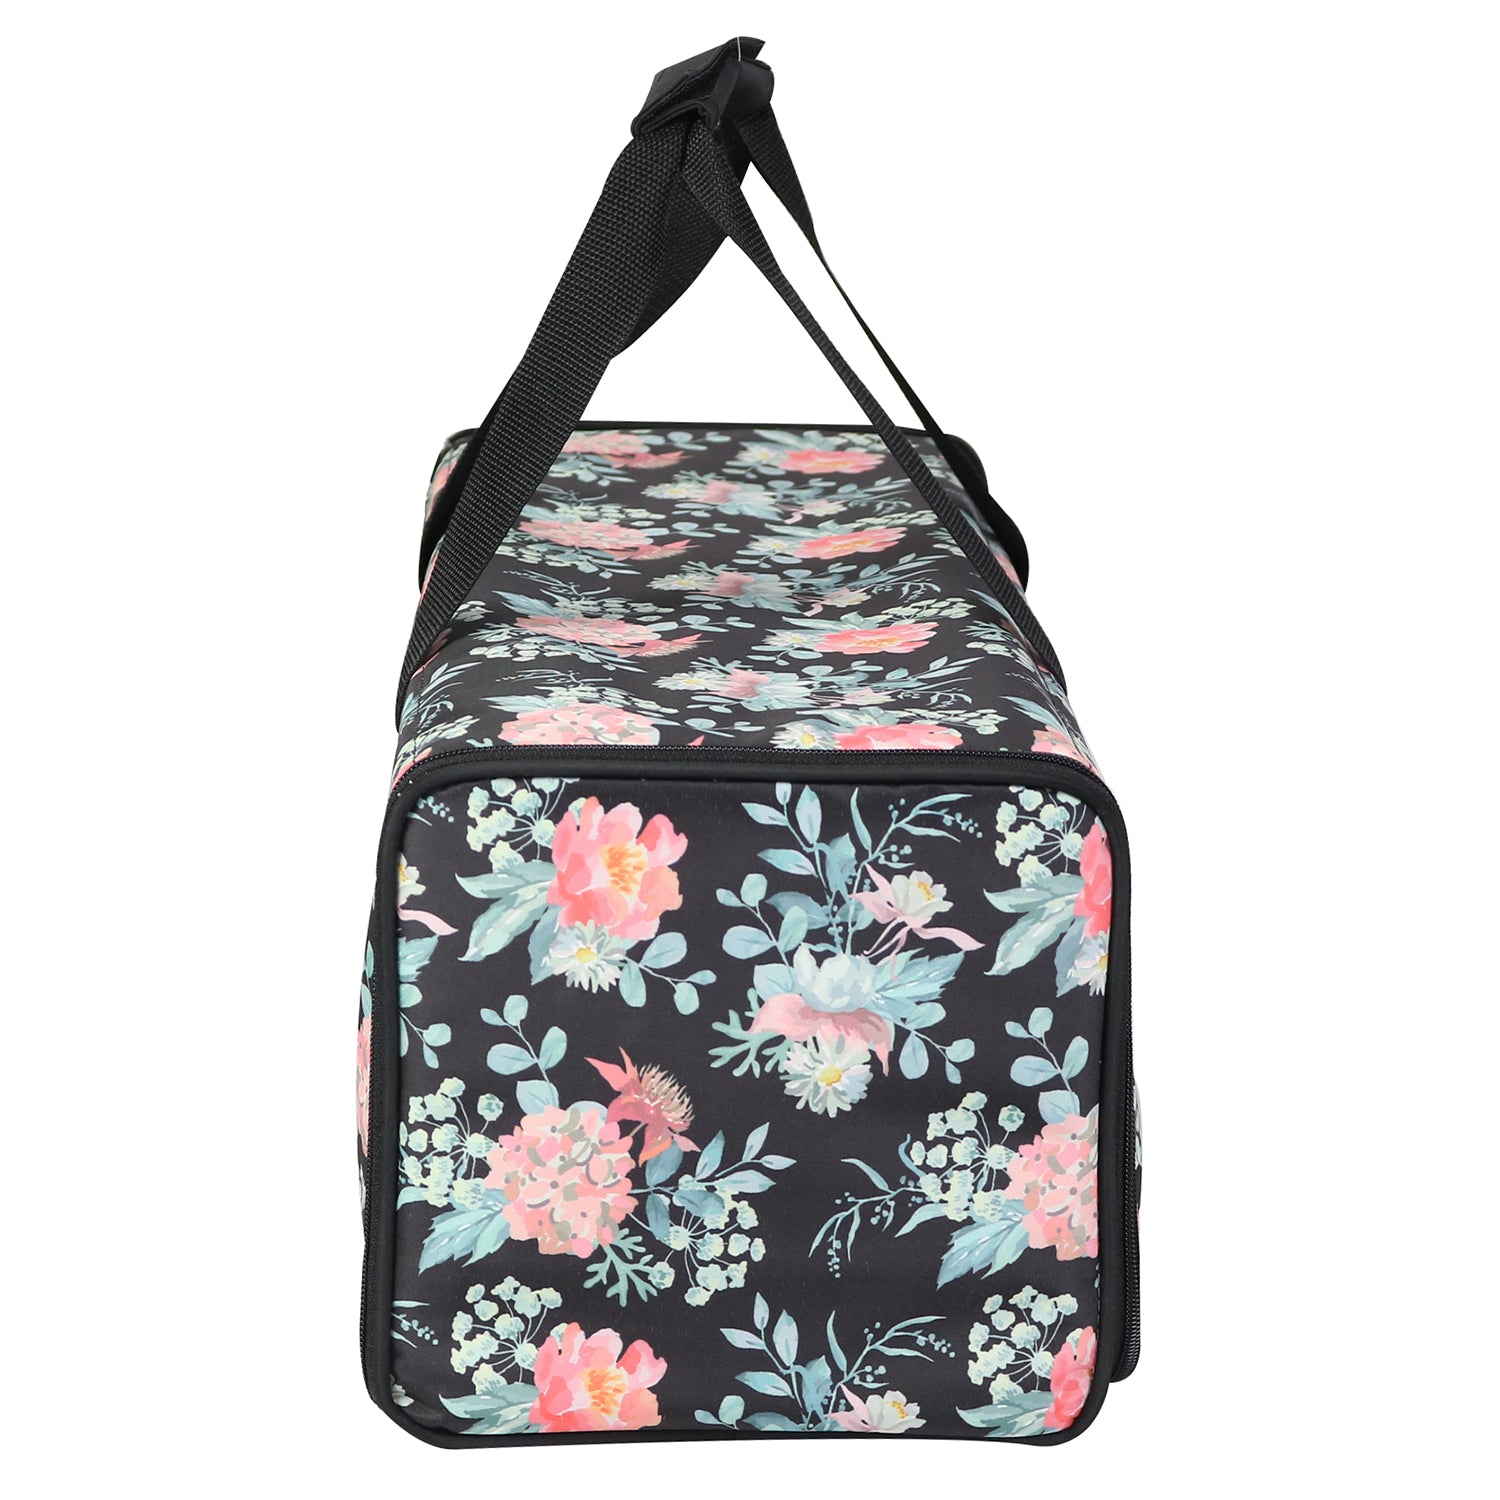 Everything Mary Die-Cut Machine Carrying Case, Floral Print - Craft Sticker  Bag Compatible with Cricut Air/Maker & Brother ScanNCut - Cutting Storage